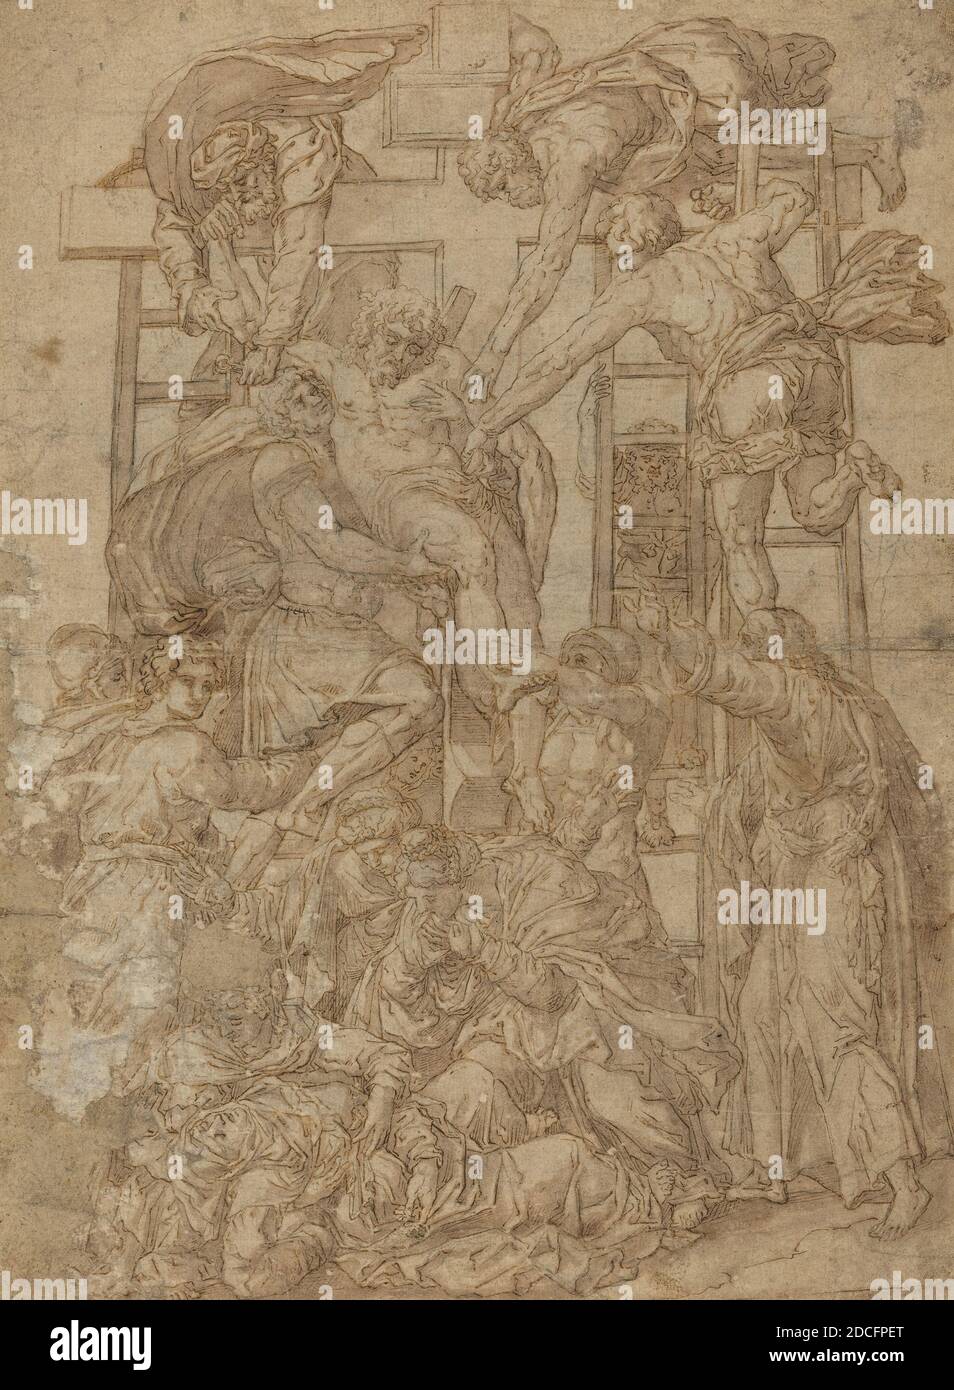 Anonymous Artist, (artist), Daniele Ricciarelli, (artist after), Italian, c. 1509 - 1566, Descent from the Cross, pen and brown ink with brown wash on laid paper, sight size: 39.7 x 29.3 cm (15 5/8 x 11 9/16 in.), support: 61.6 x 51.1 cm (24 1/4 x 20 1/8 in Stock Photo